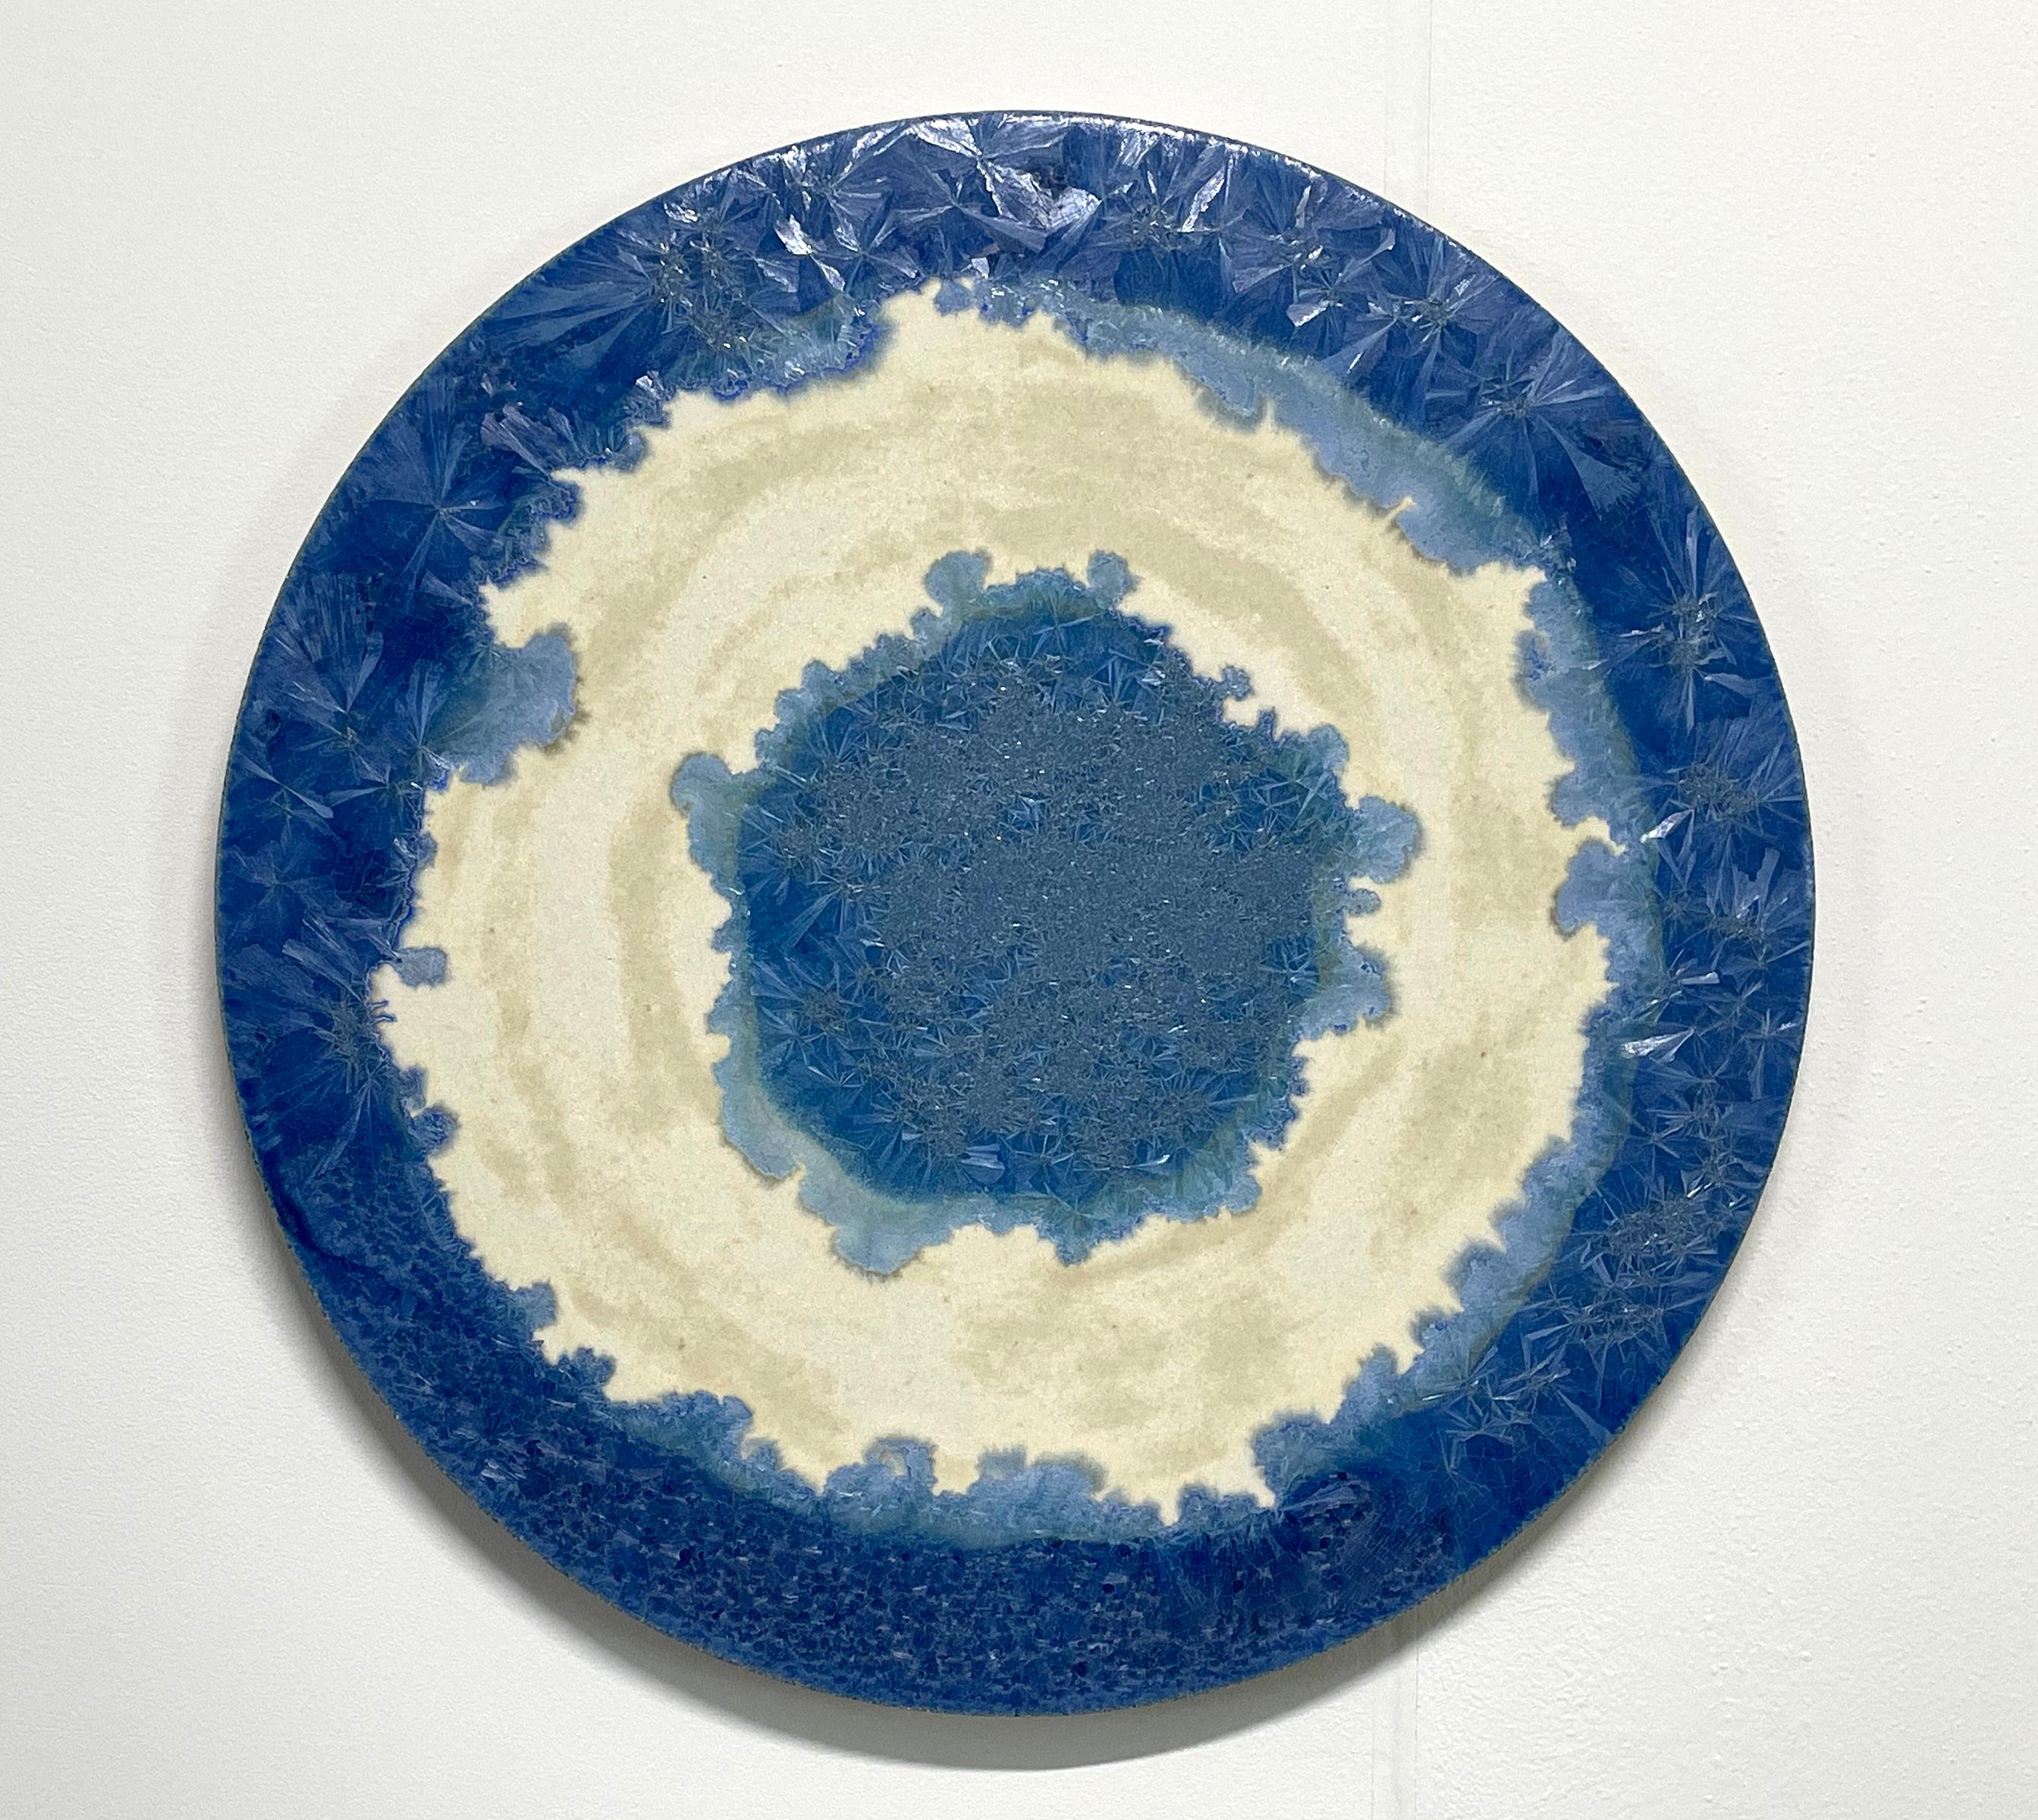 Lil Star
Ceramic crystal glaze painting by William Edwards
Hand rolled earthenware circular slab with crystal glaze. 

William received his BFA in sculpture from the historic San Francisco Art Institute and his MFA from UC Davis. William produces